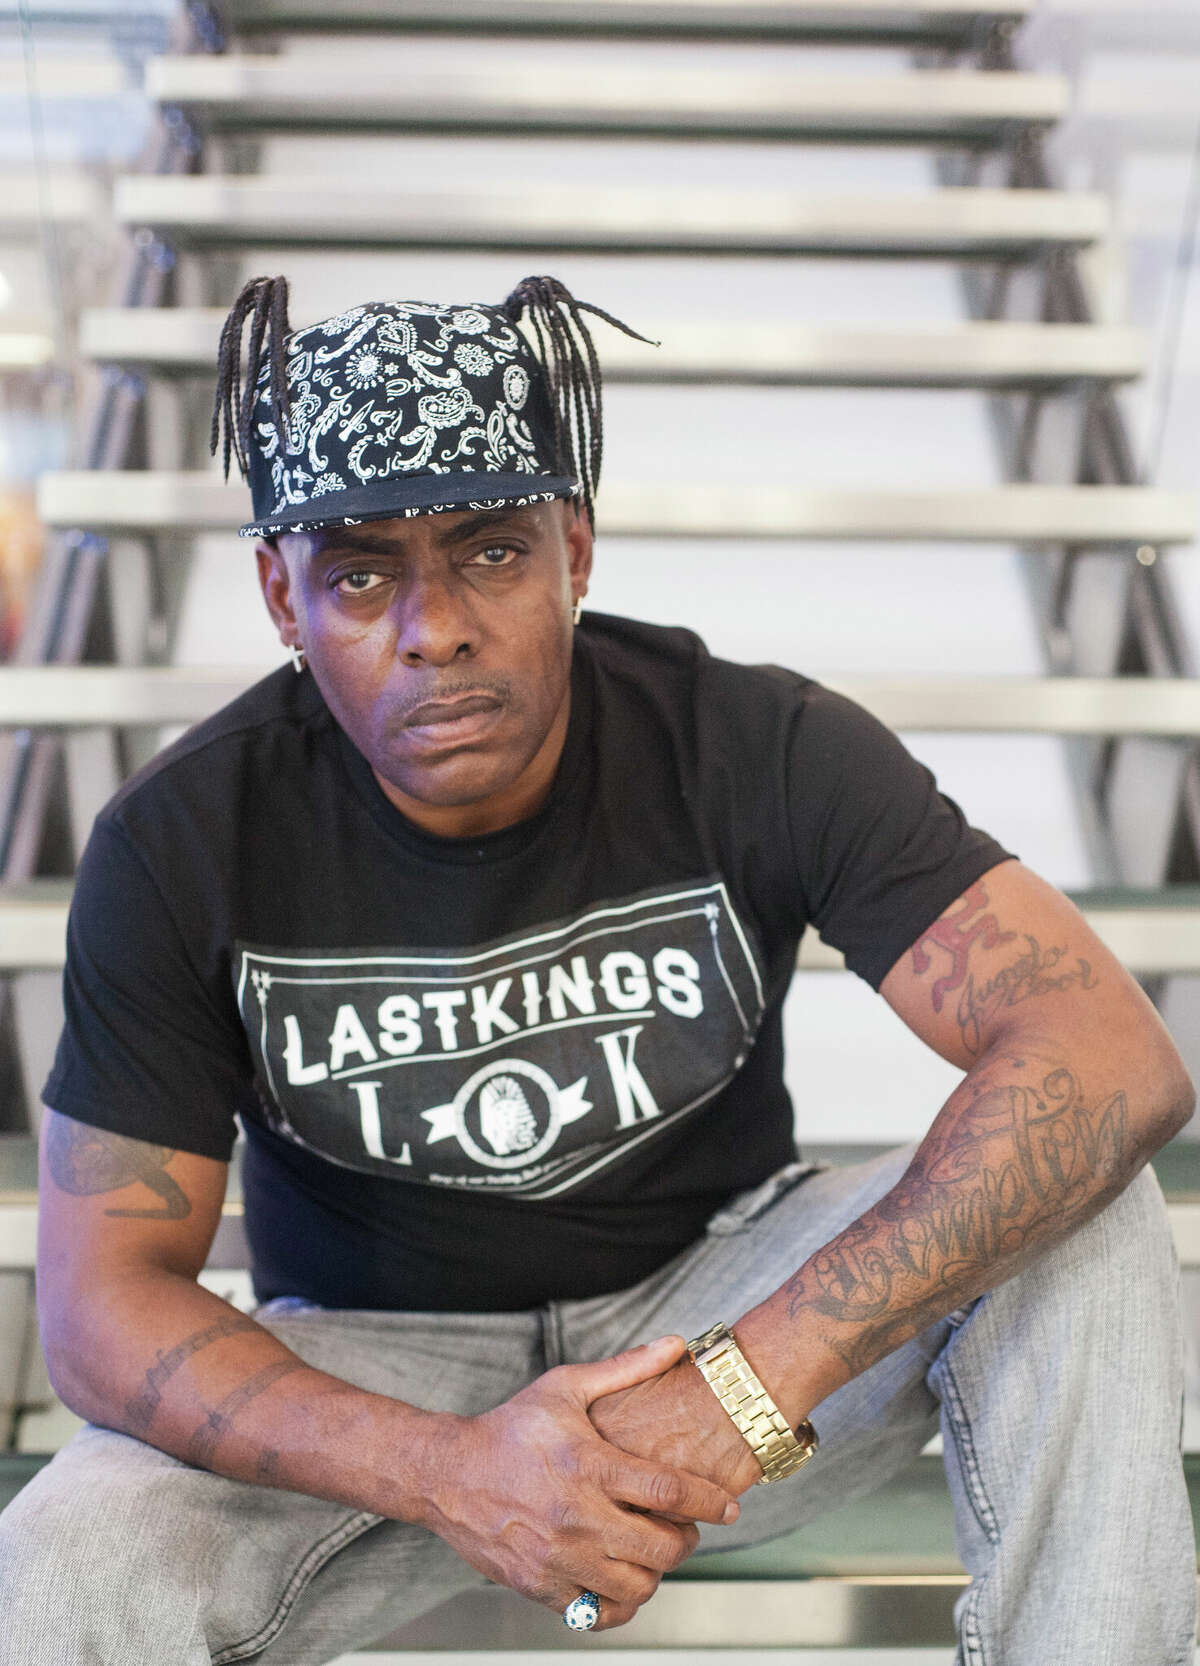 NEW YORK, NY - SEPTEMBER 10: Rapper Coolio poses for a portrait at the SiriusXM Studios on September 10, 2015 in New York City. (Photo by Kris Connor/Getty Images)